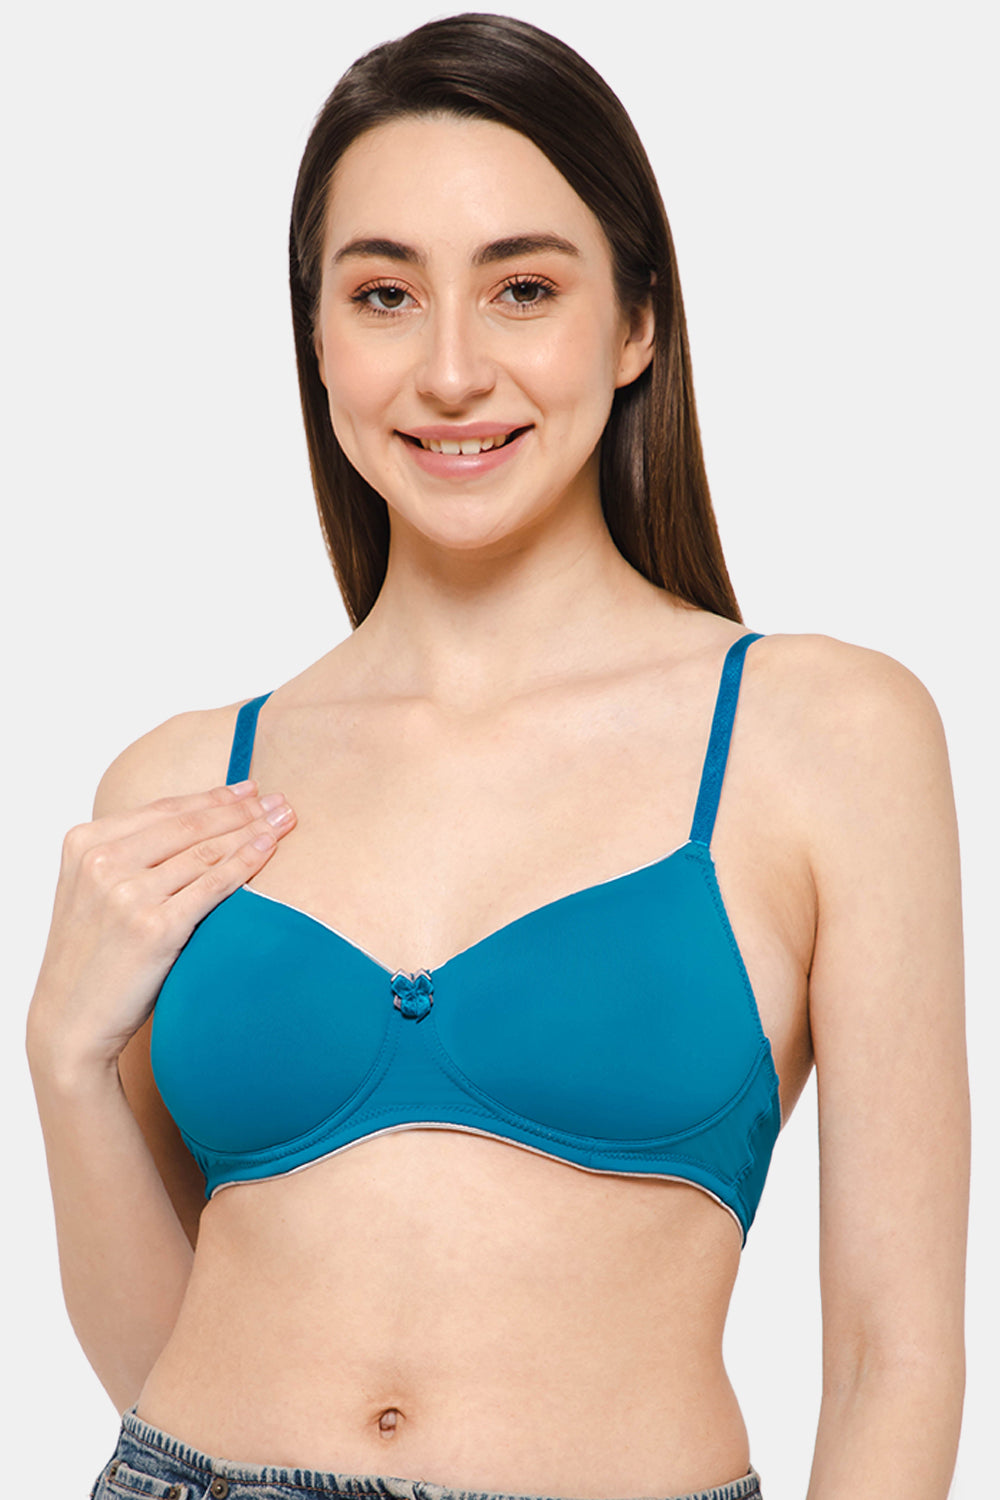 Plain Sports Women's Fancy back Design Bra or Everyday at Rs 42